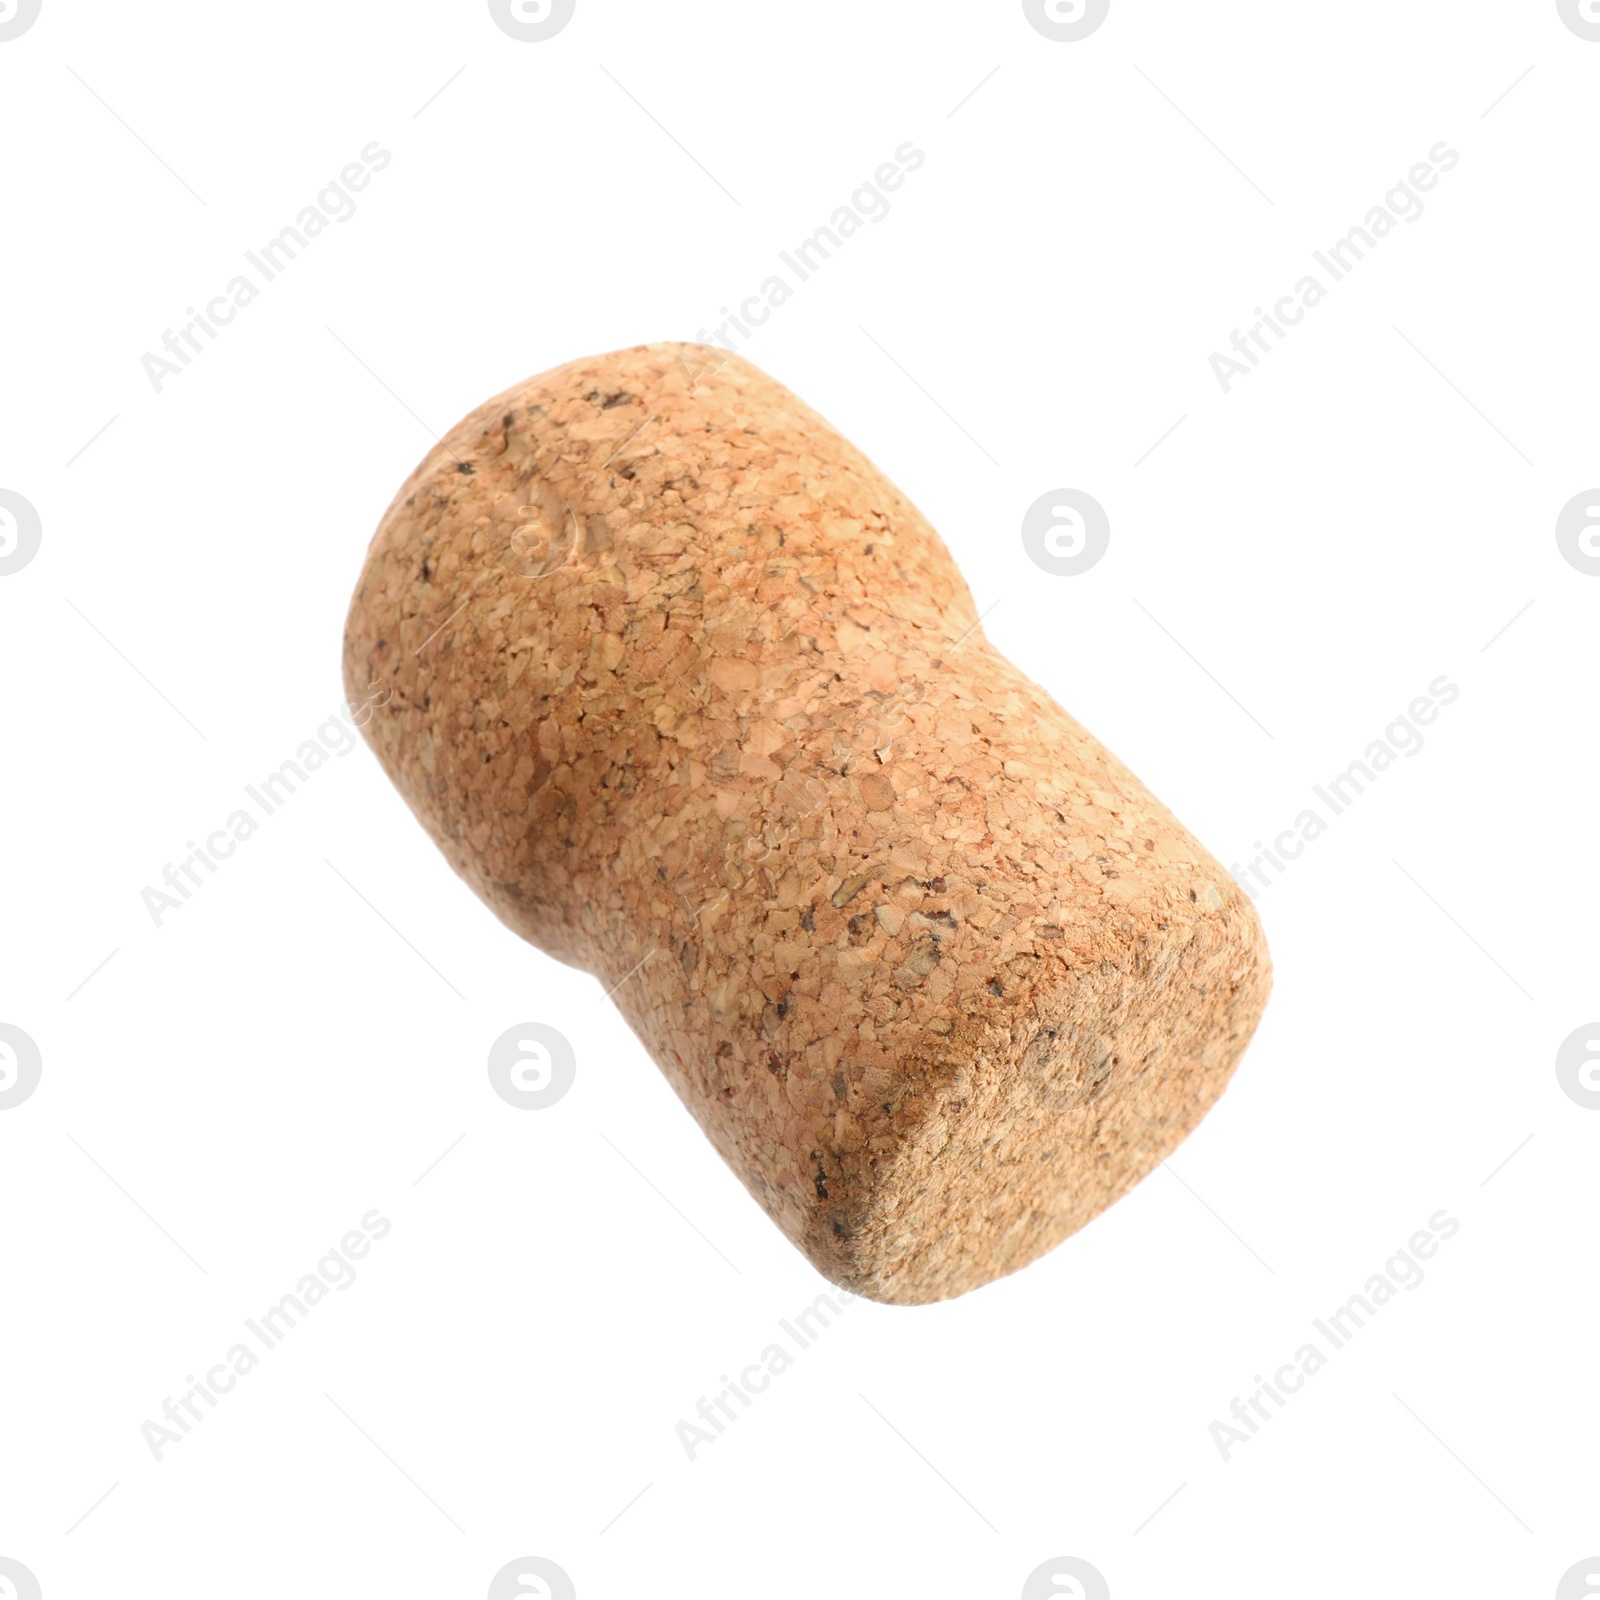 Photo of One sparkling wine cork isolated on white